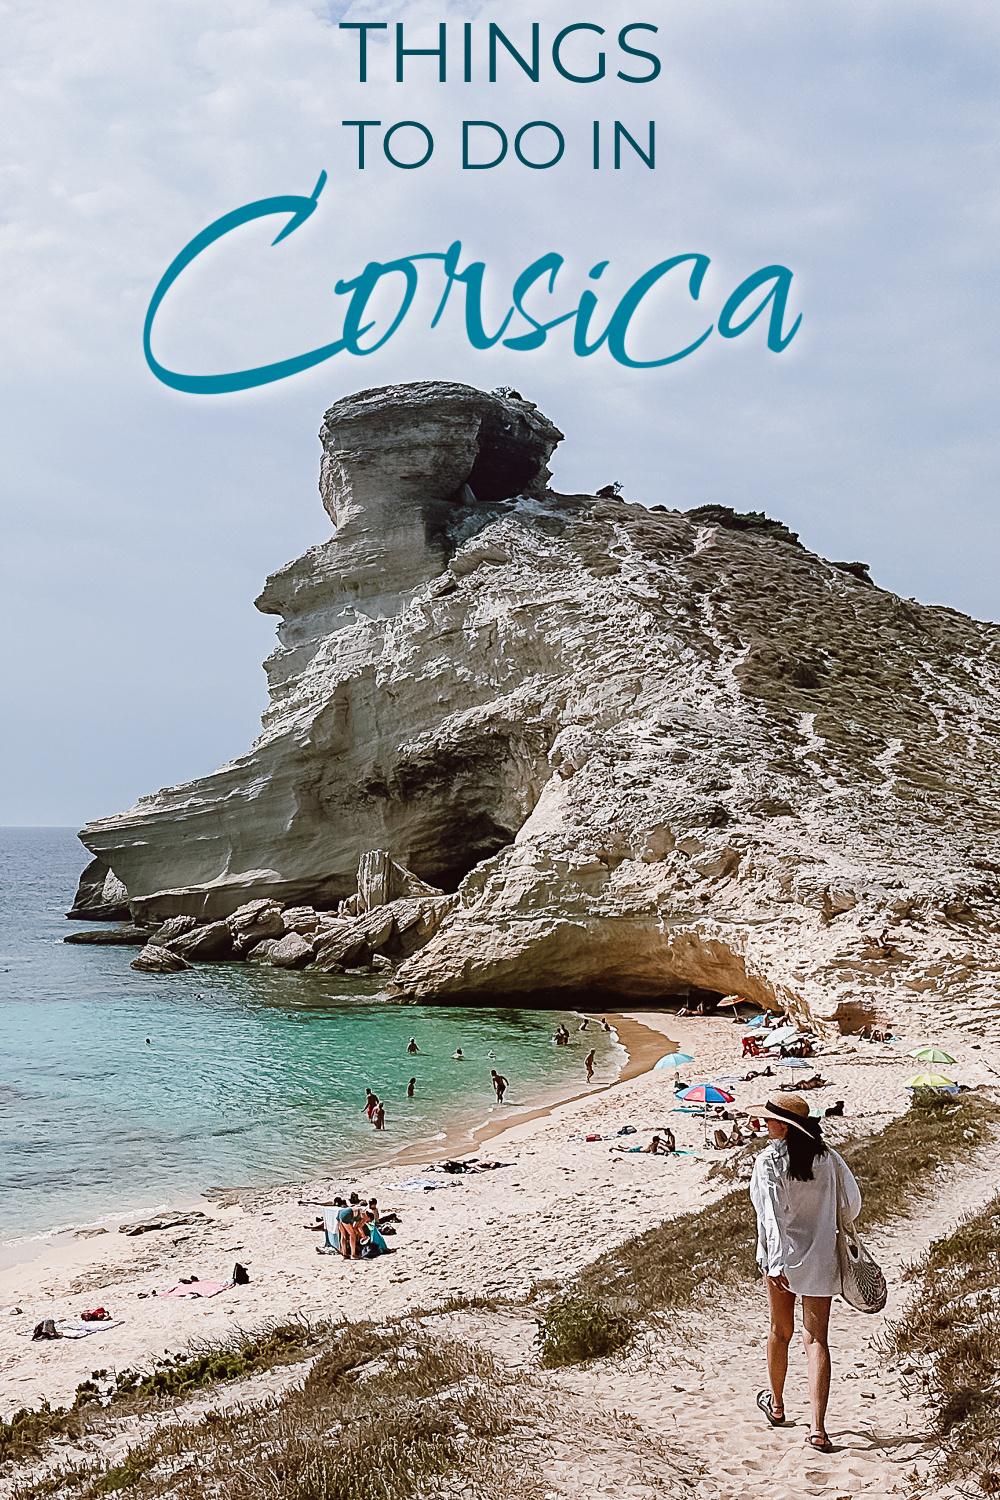 Things to do in Corsica, France